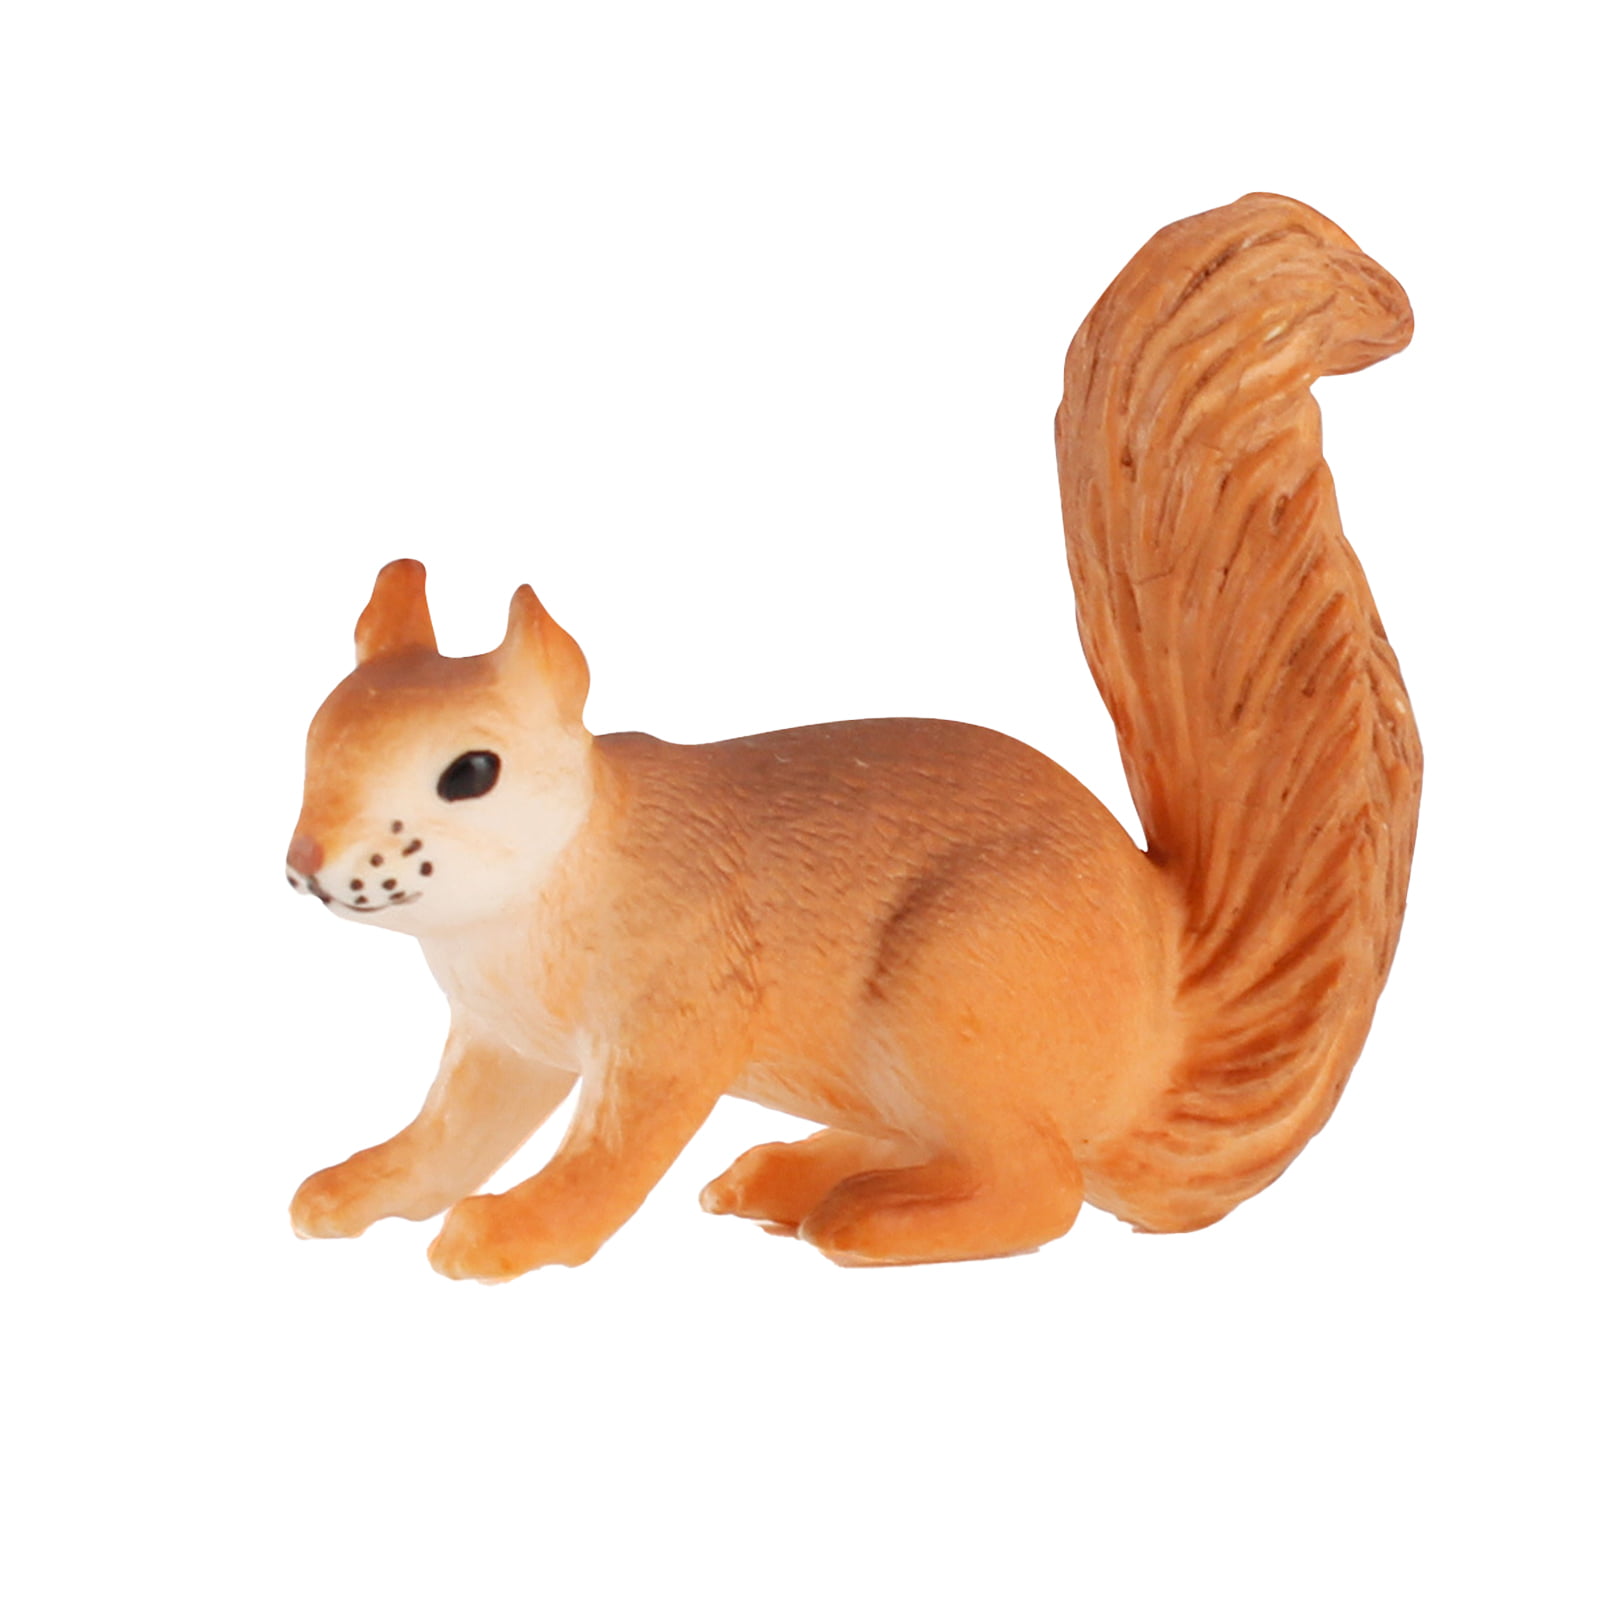 Red Squirrel Garden Ornament Wood Effect Resin Animal Sculpture Home Decor GIFT 